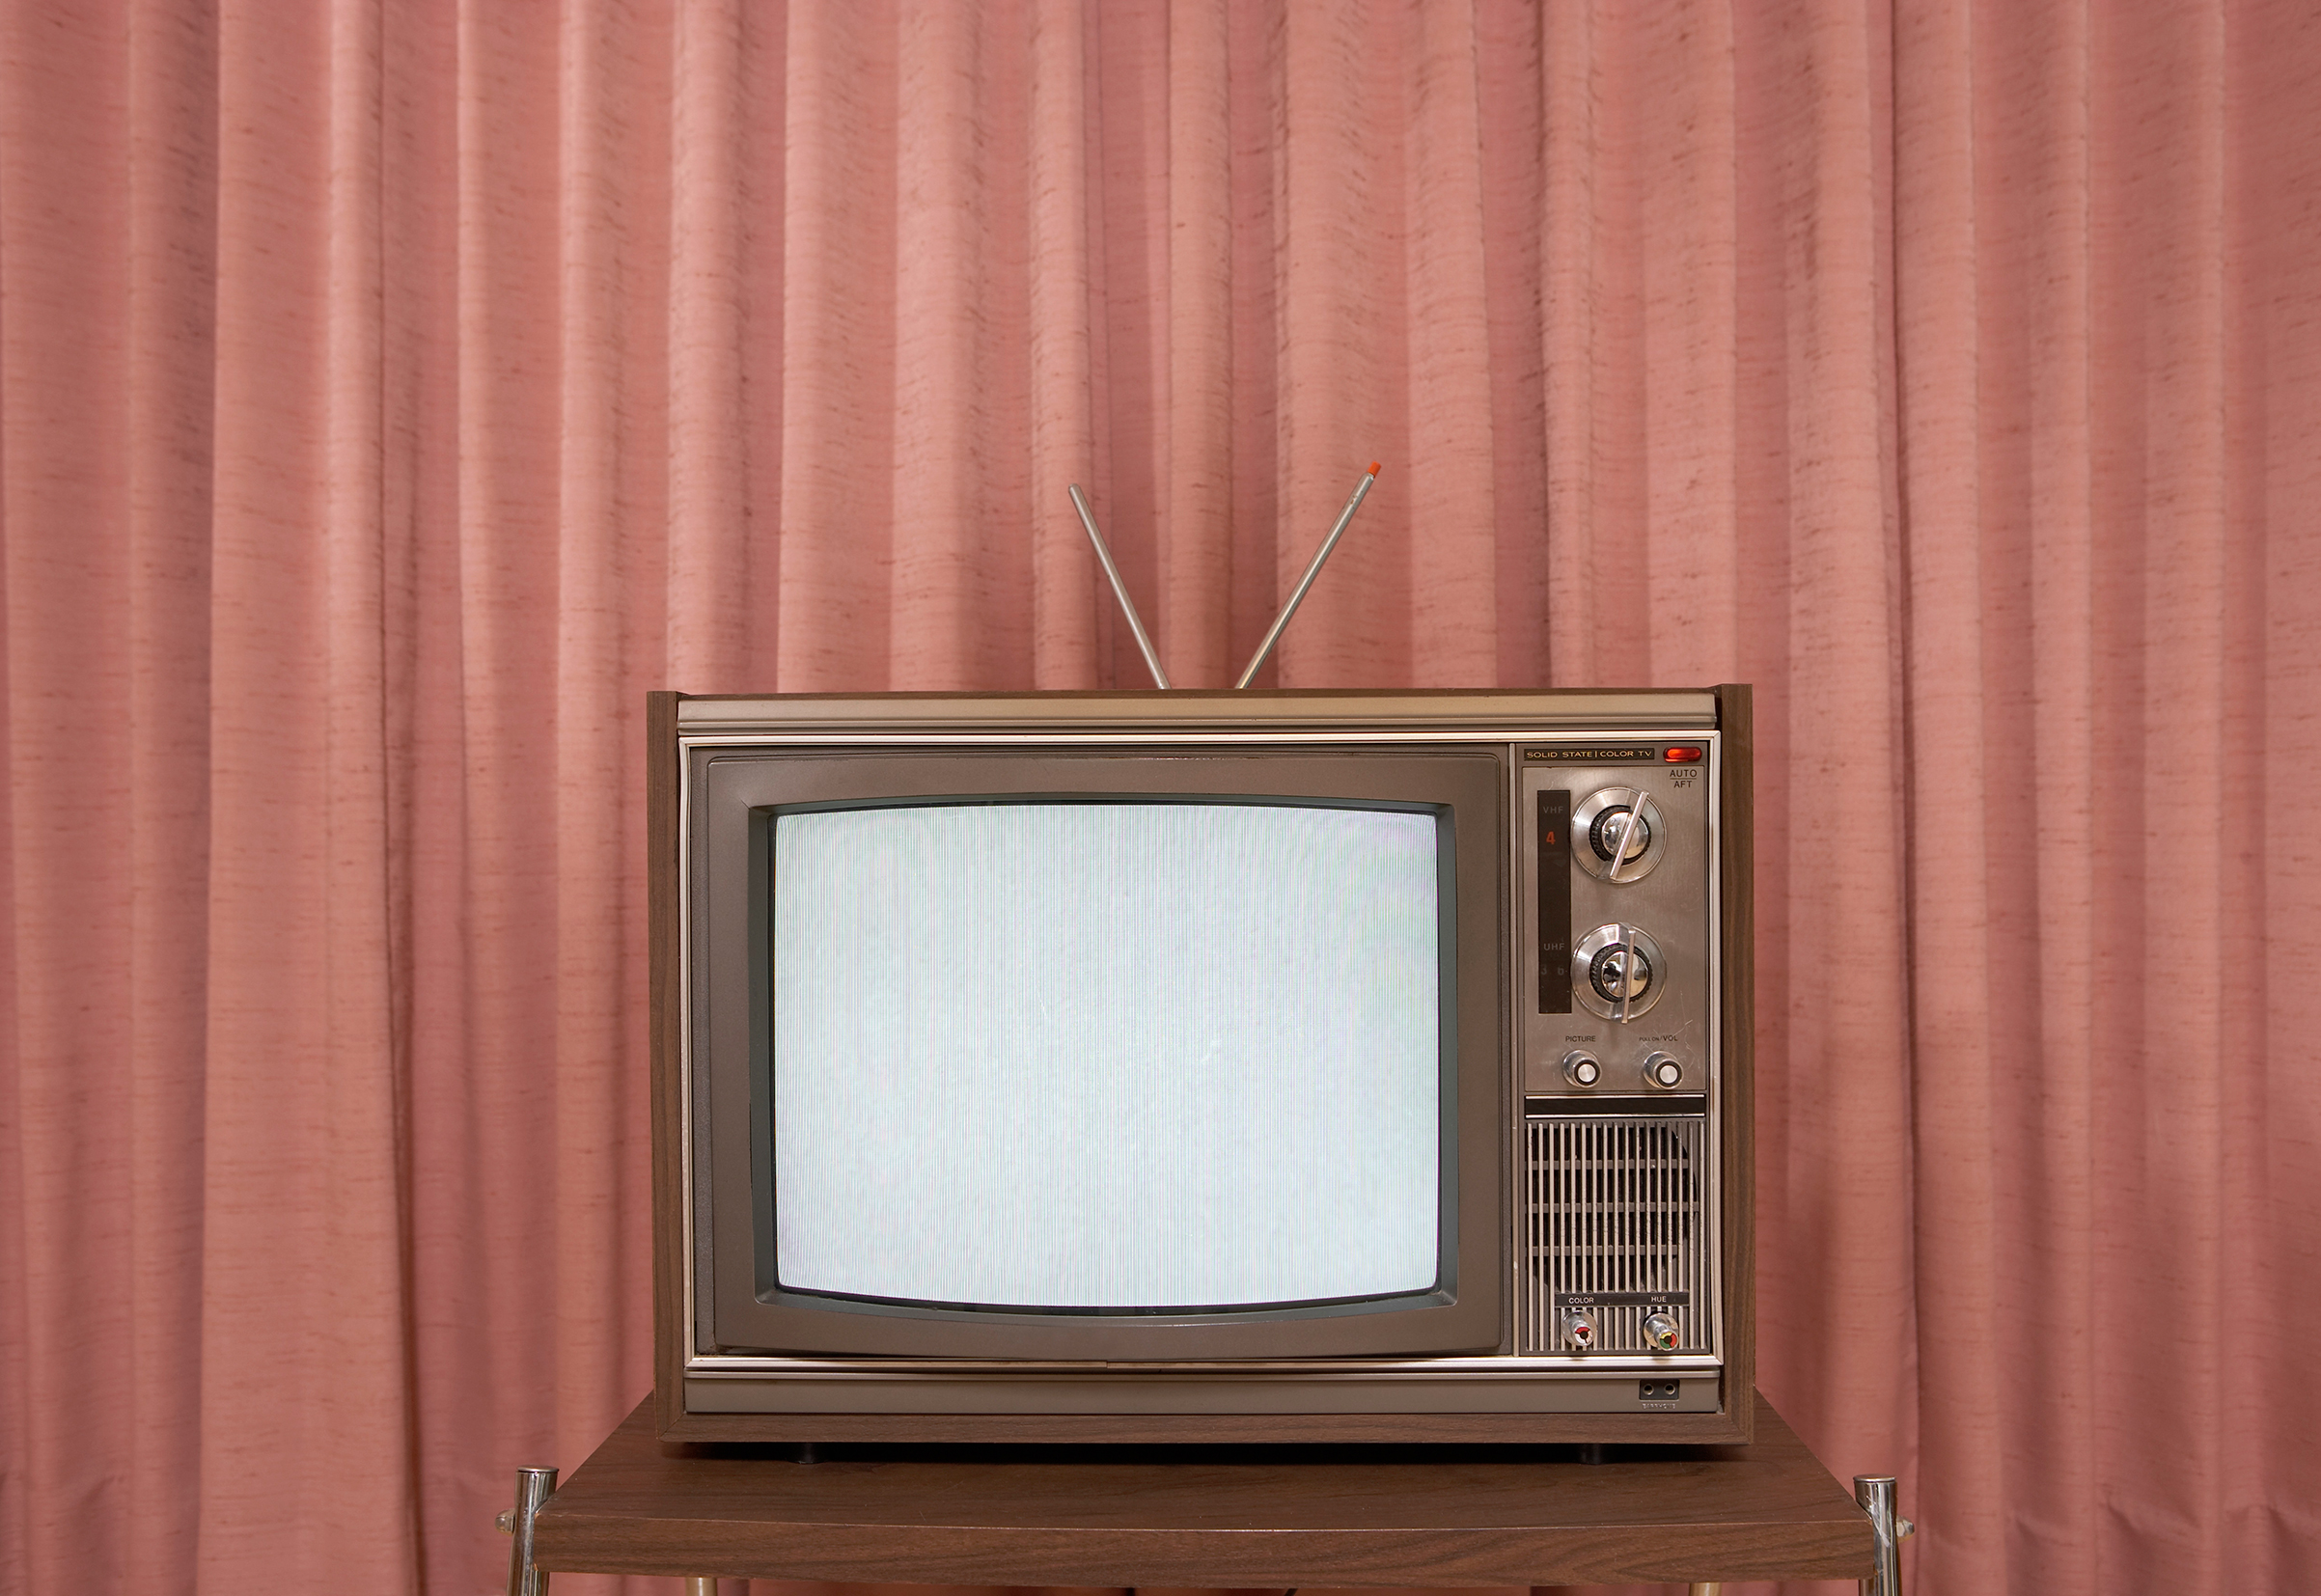 Old television on stand, in front of curtain